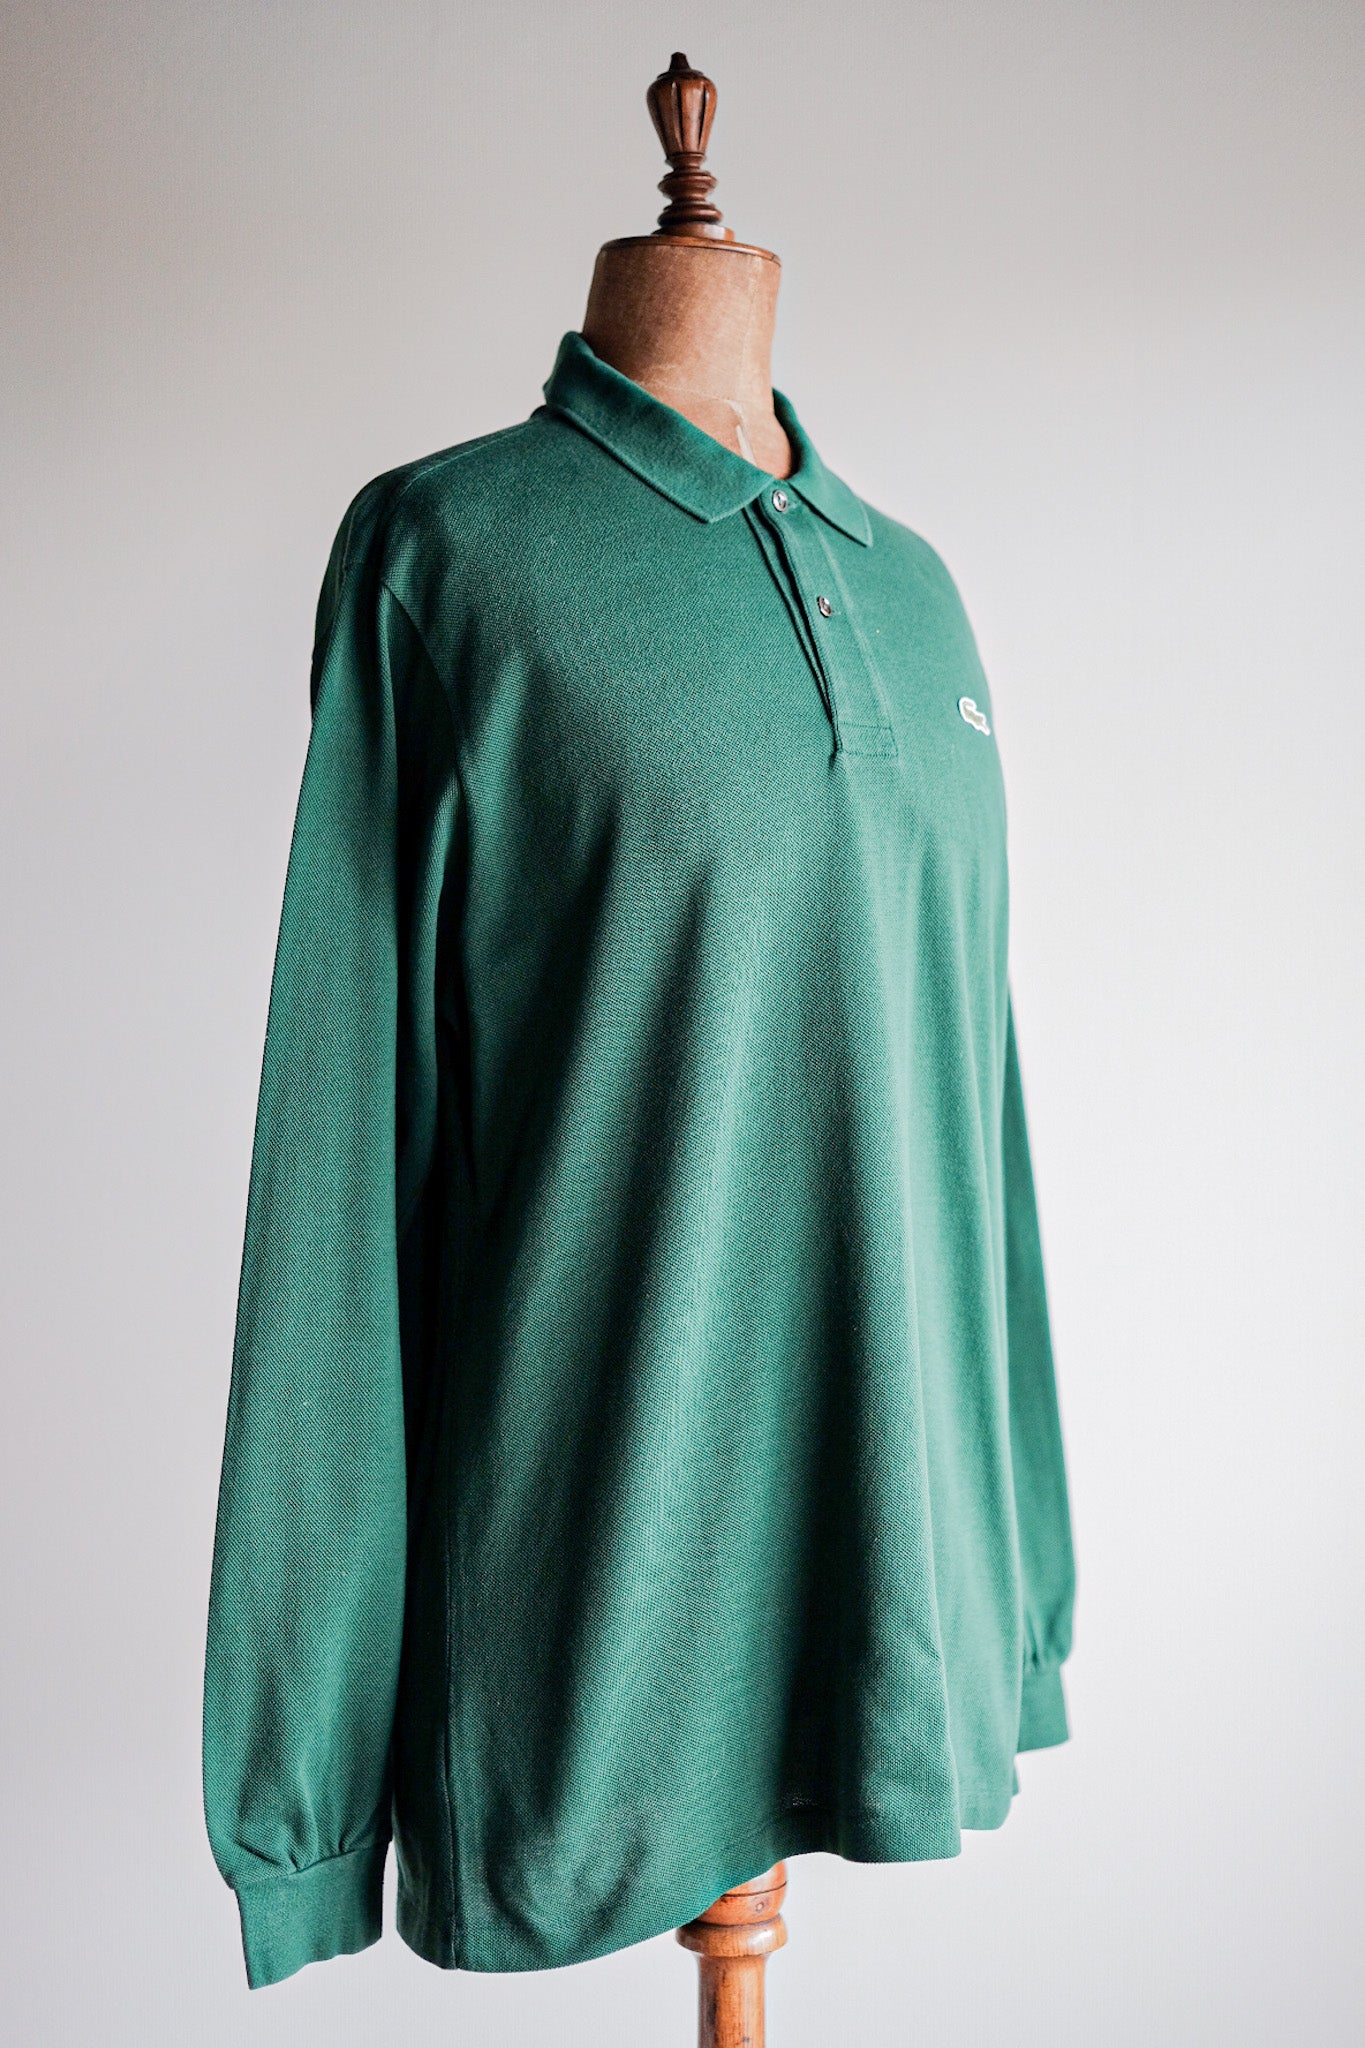 [~ 80's] Chemise Lacoste L/S Polo Shirt Size.5 "FOREST GREEN"